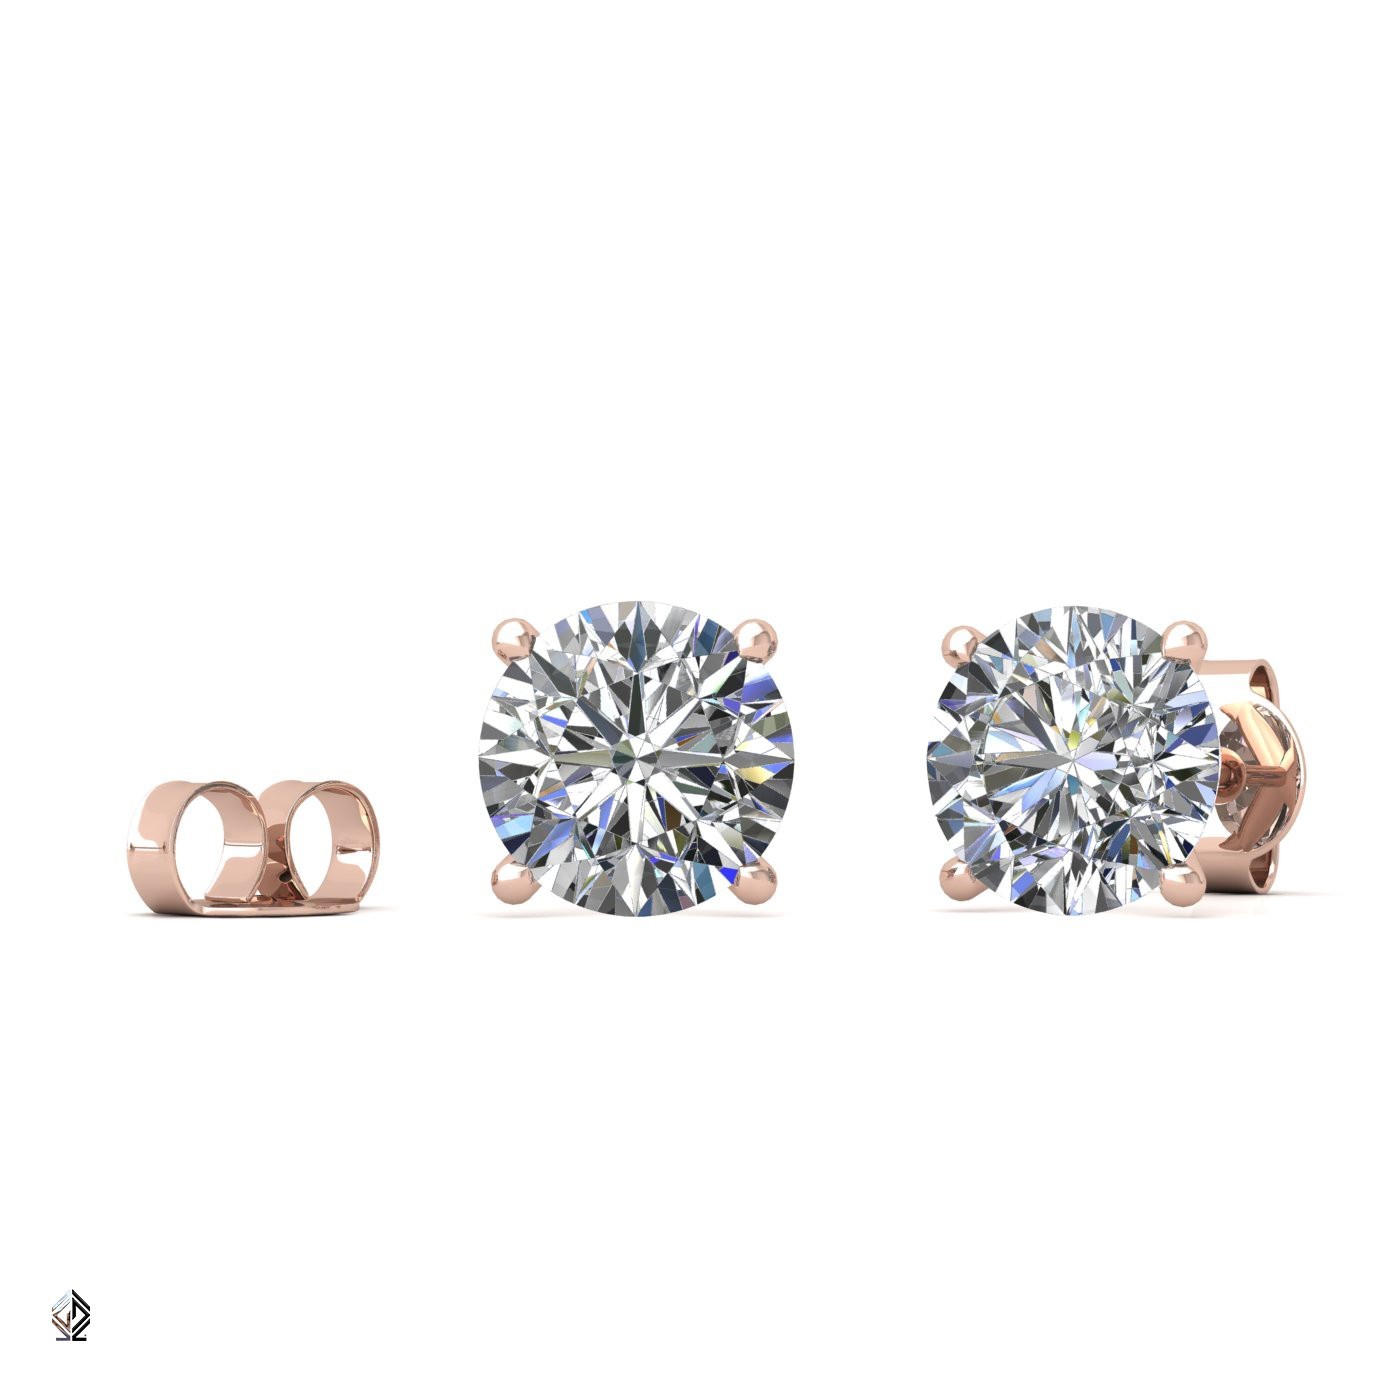 18k rose gold 0,3 ct each (0,6 tcw) 4 prongs round cut classic diamond earring studs Photos & images